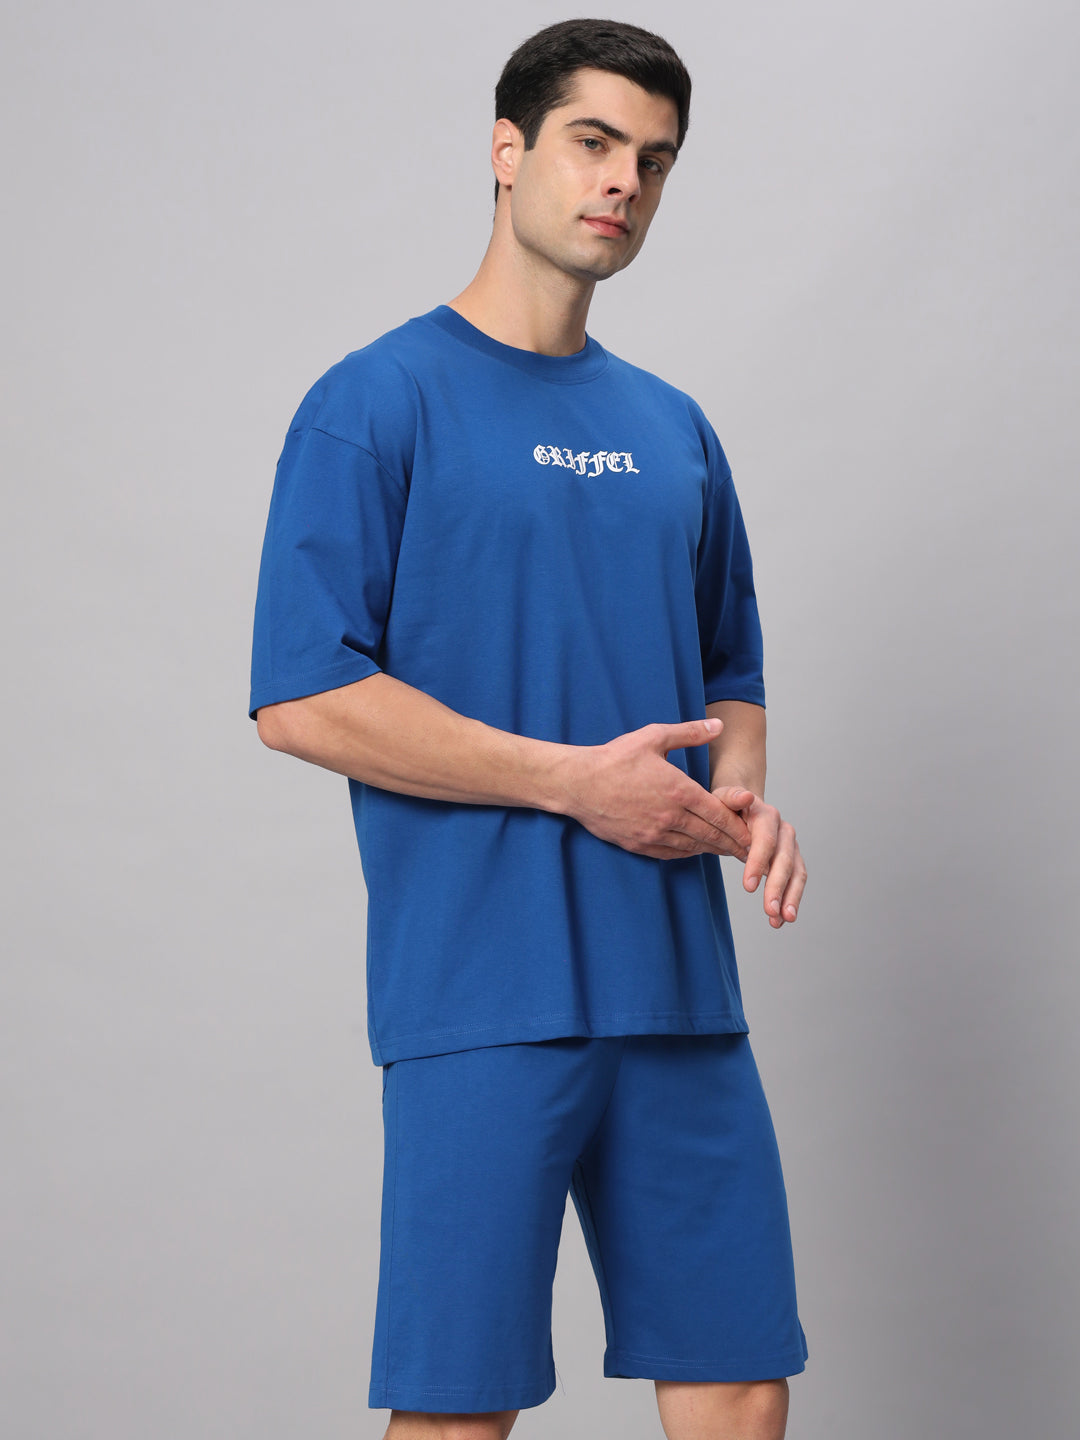 MAKE A MOVE T-shirt and Shorts Set - griffel